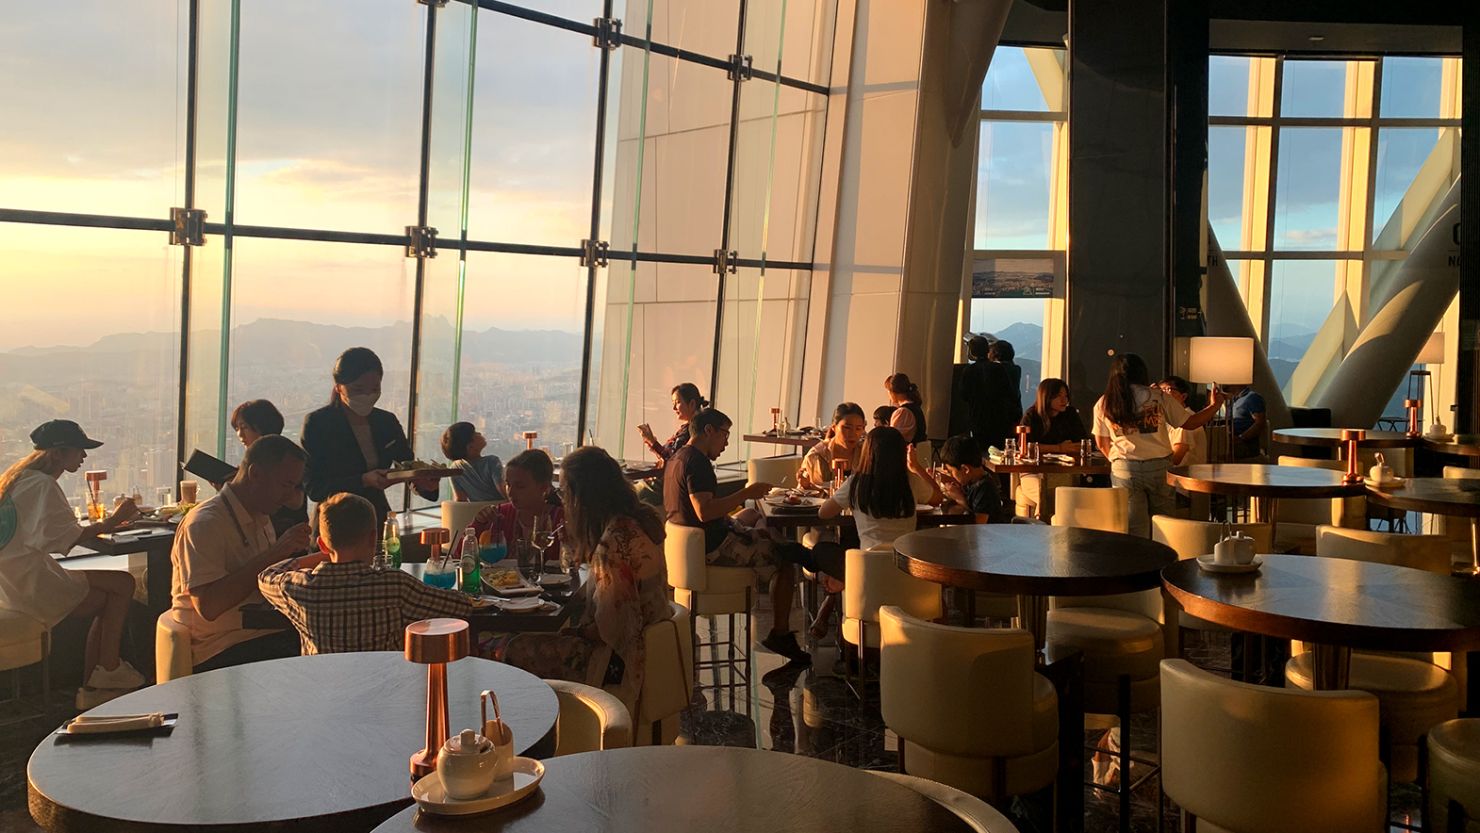 The 123F Lounge in the Lotte World Tower in Seoul.